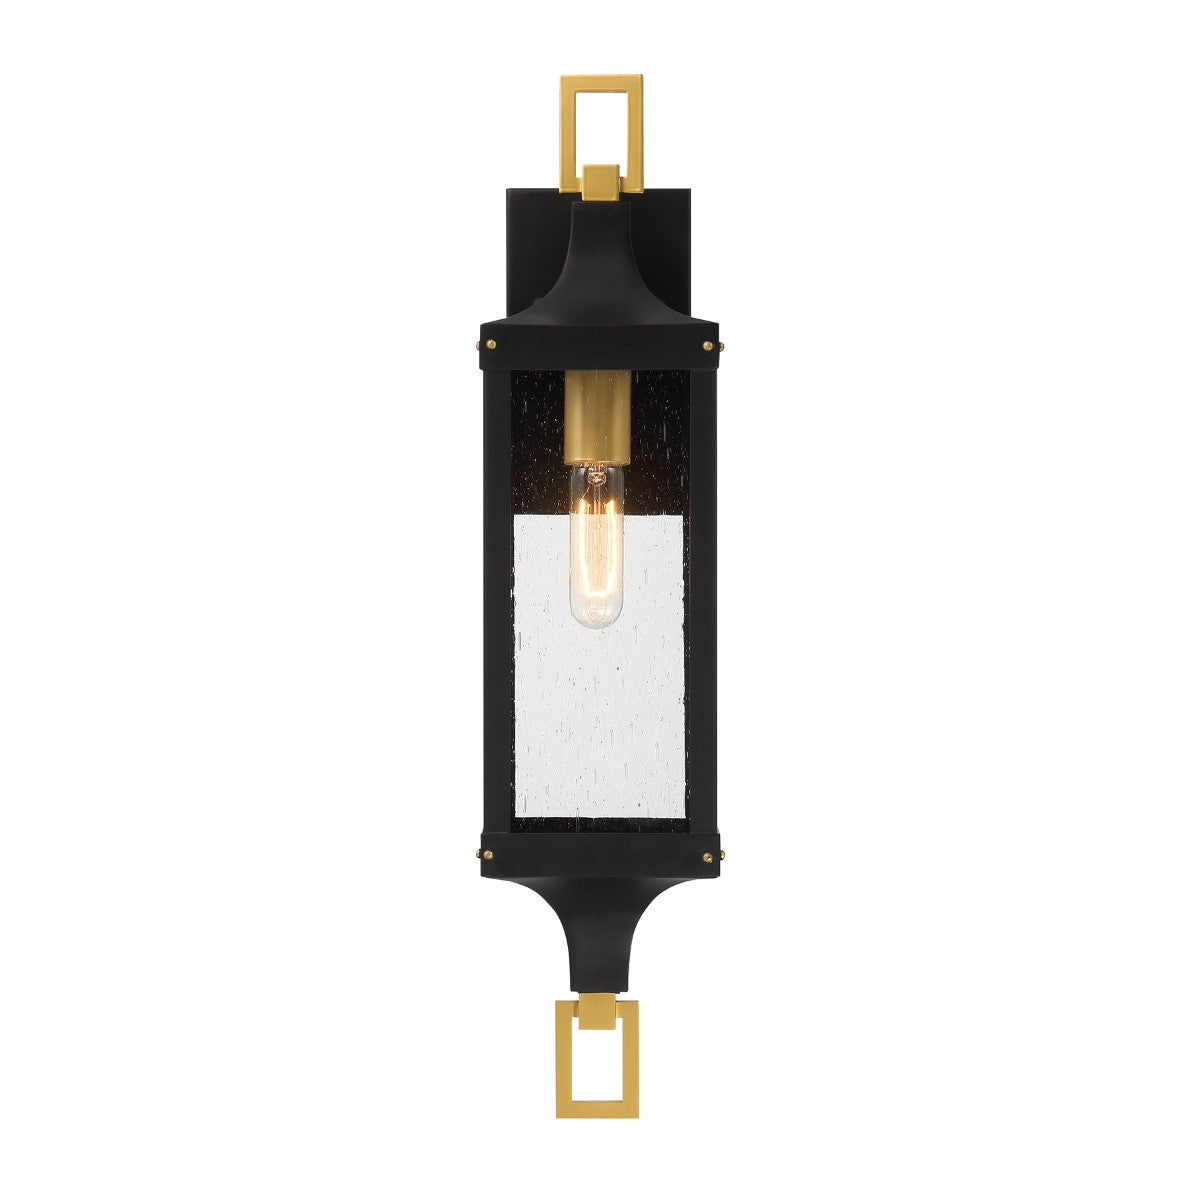 Glendale 25 in. Outdoor Wall Lantern Matte Black and Weathered Brushed Brass Finish